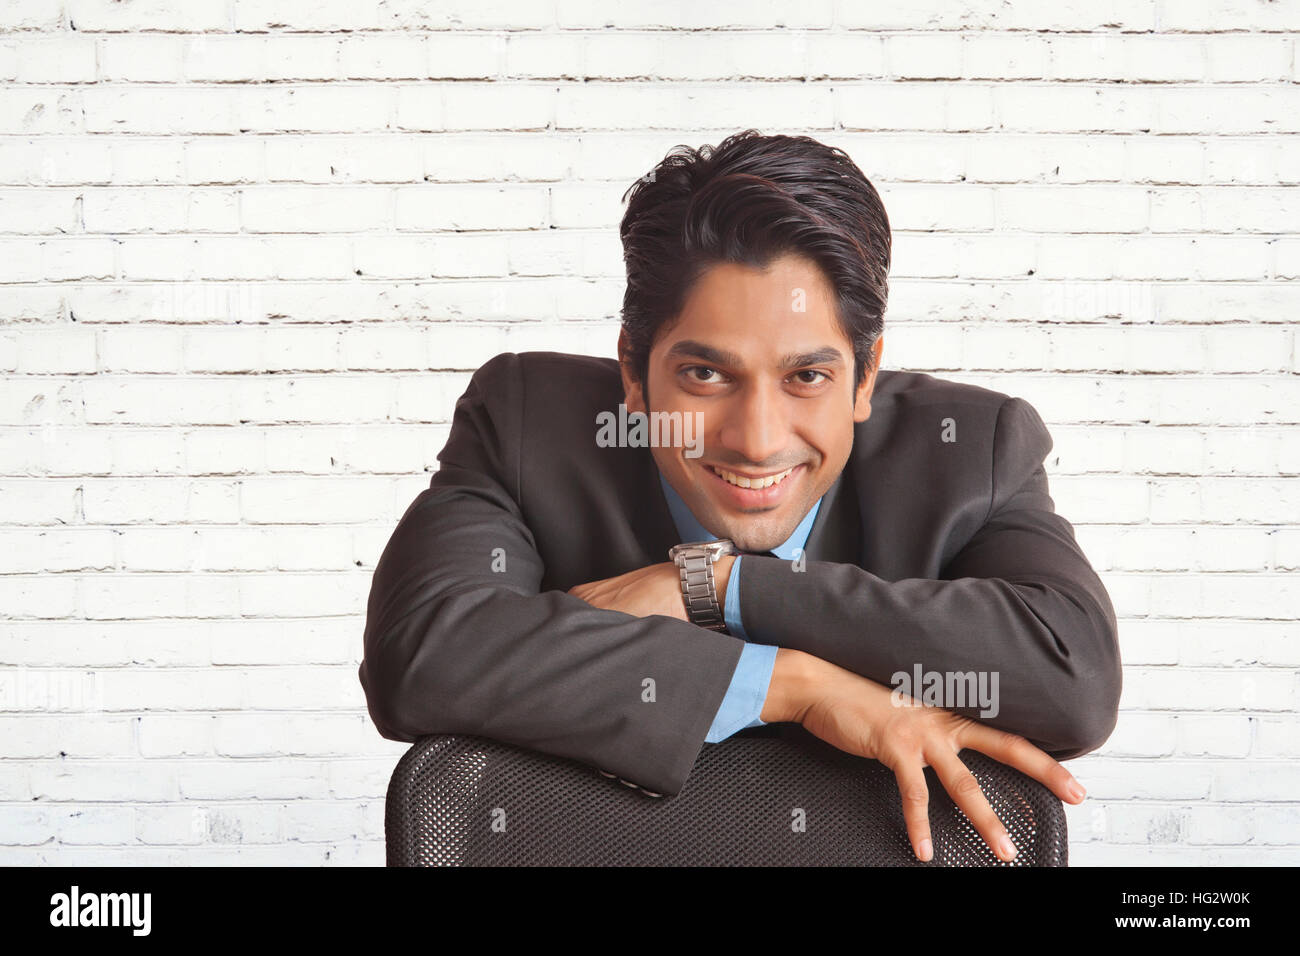 Happy businessman leaning on chair looking at camera Banque D'Images